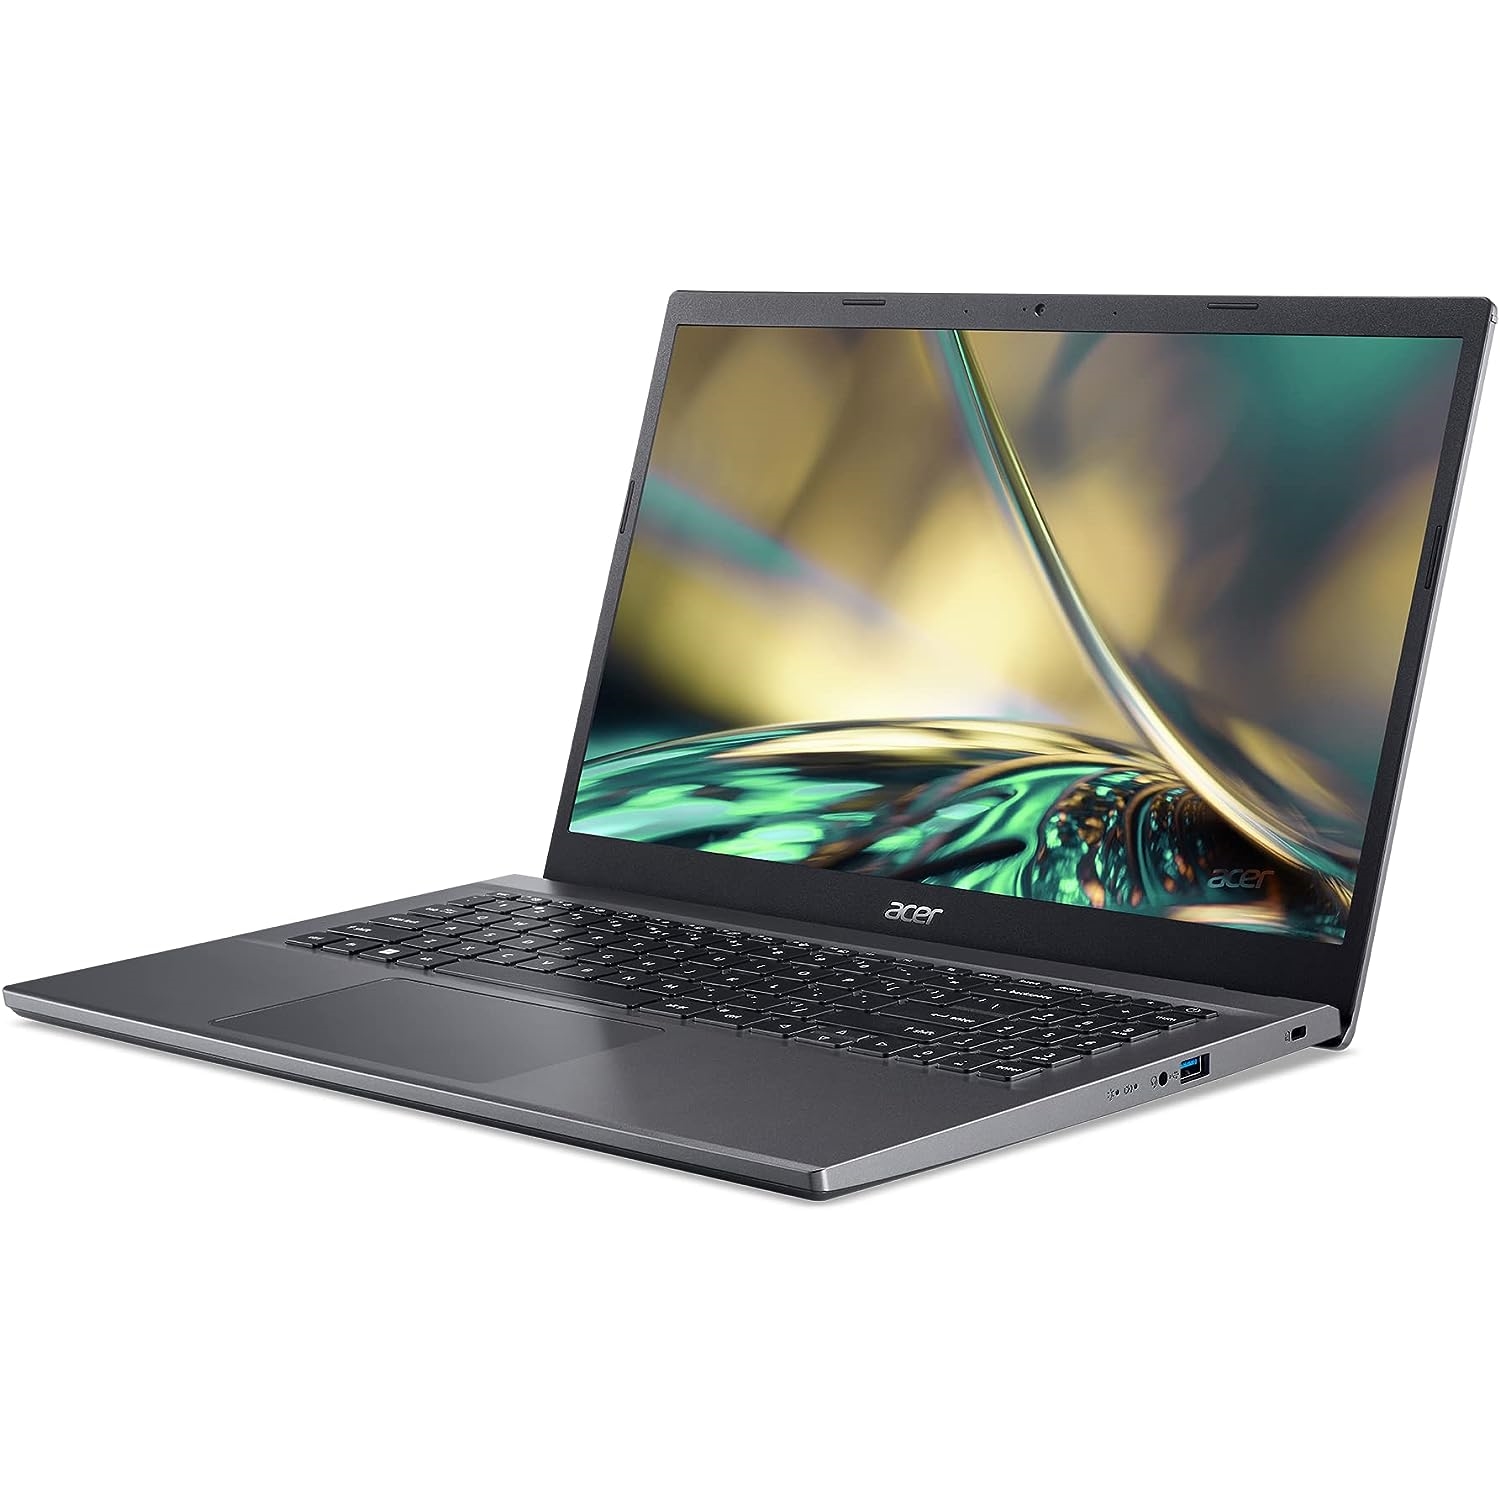 ACER%20ASPİRE%205%20A515-47-R739%20NX.K80EY.003%20RYZEN%205%205625U%208GB%20512GB%20SSD%20O/B%20VGA%2015.6’’%20FHD%20FREEDOS%20NOTEBOOK